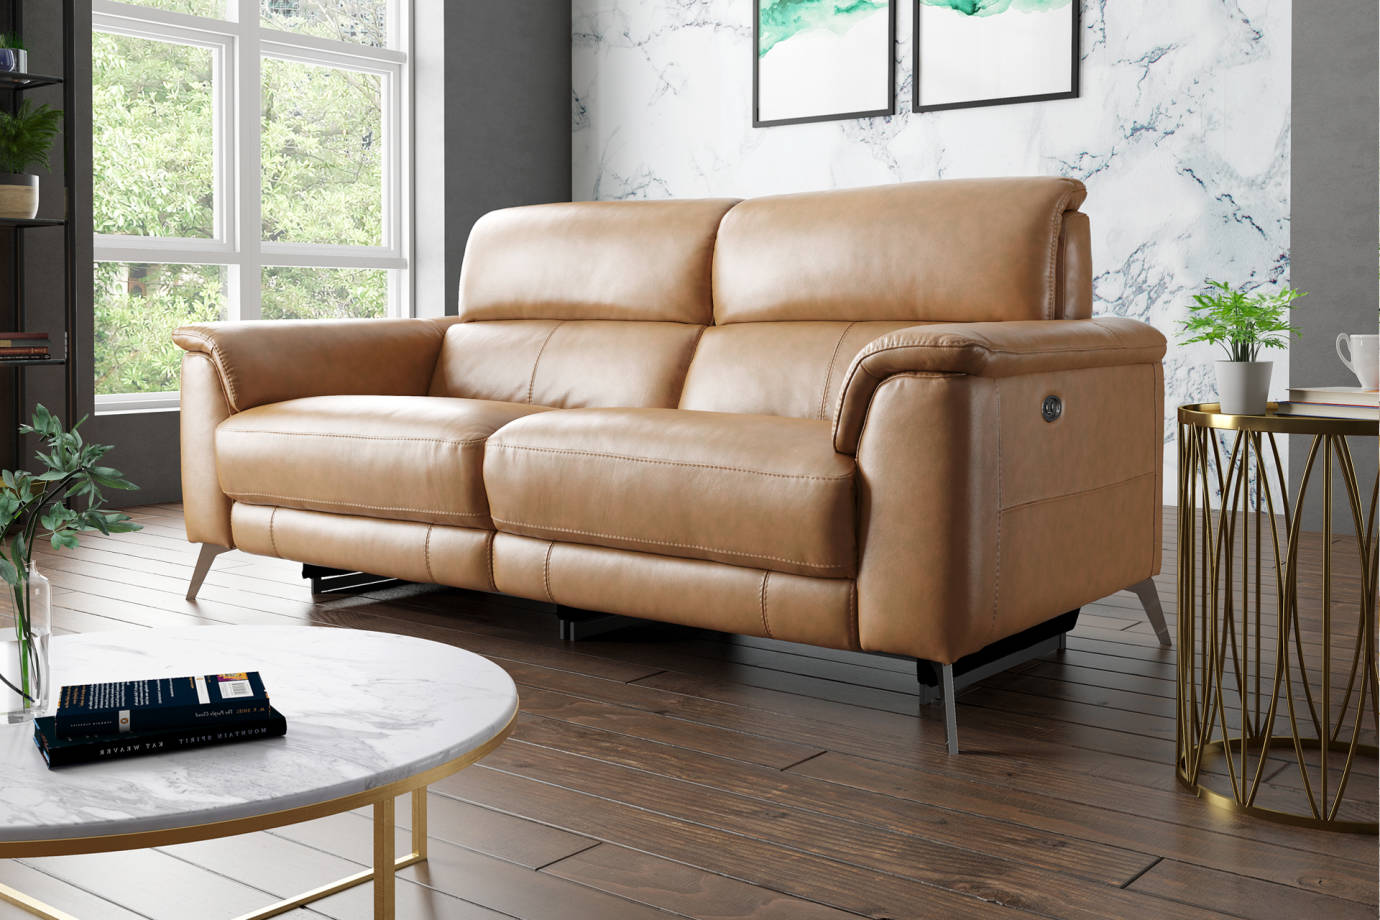 Recliner Sofas Leather Fabric And, Brown Leather Sofa Recliner